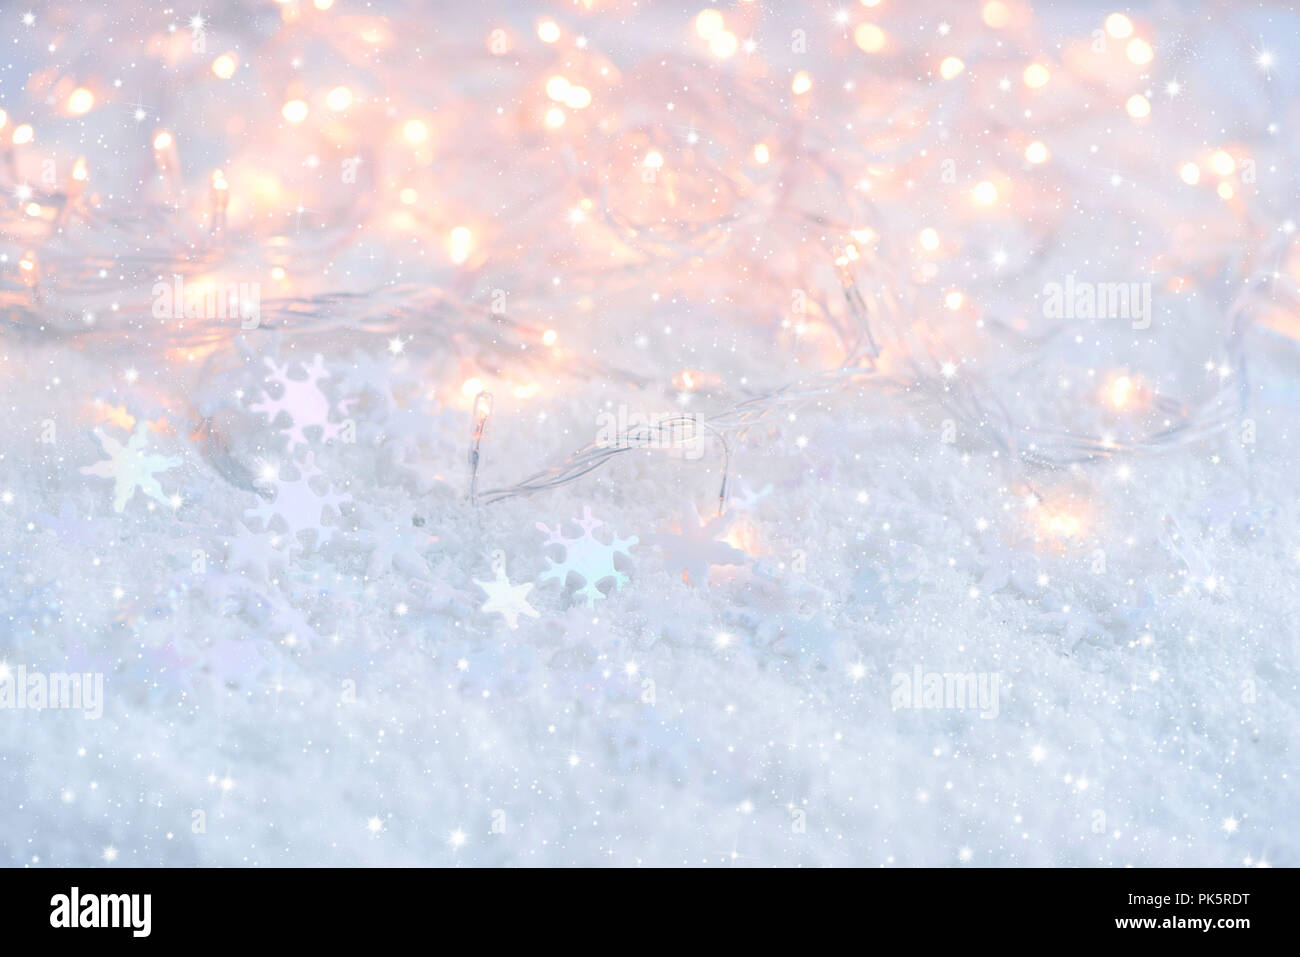 Christmas lights with snowflakes on snow. Christmas festive background Stock Photo